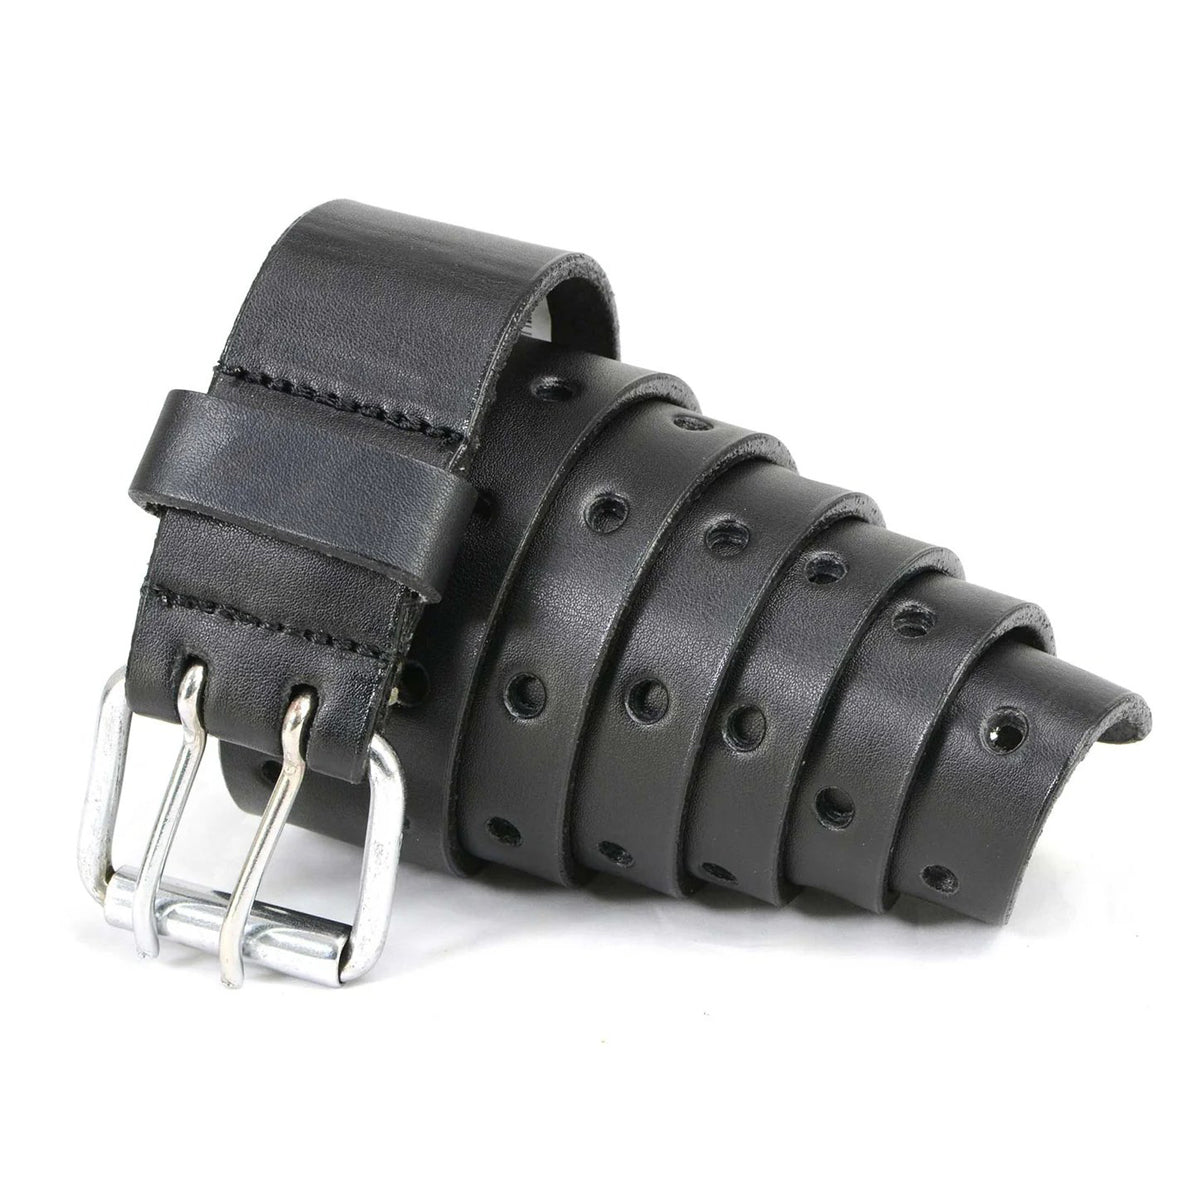 Men's Double Prong - Black Genuine Leather Belt with Interchangeable Buckle - 1.5 inches Wide